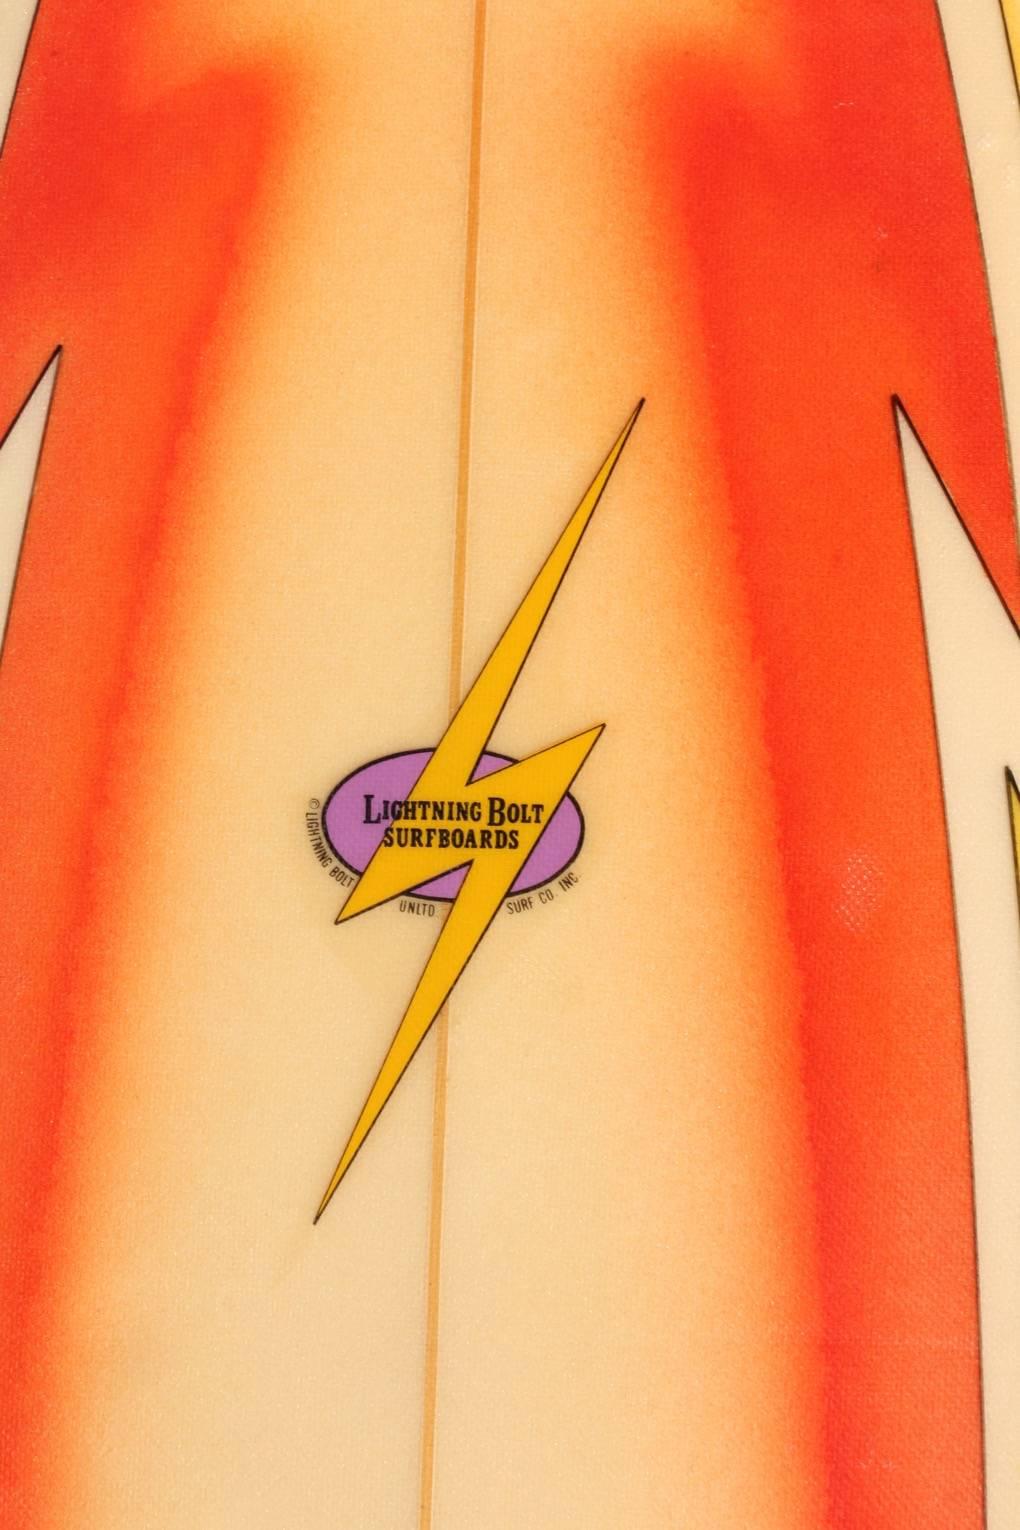 Beautiful, all original and well used Lightning Bolt Surfboard made in the Honolulu Hawaii factory around 1974-1975. In the early days of Lightning Bolt, founders Gerry Lopez & Jack Shipley were shaping boards themselves. This example is a diamond